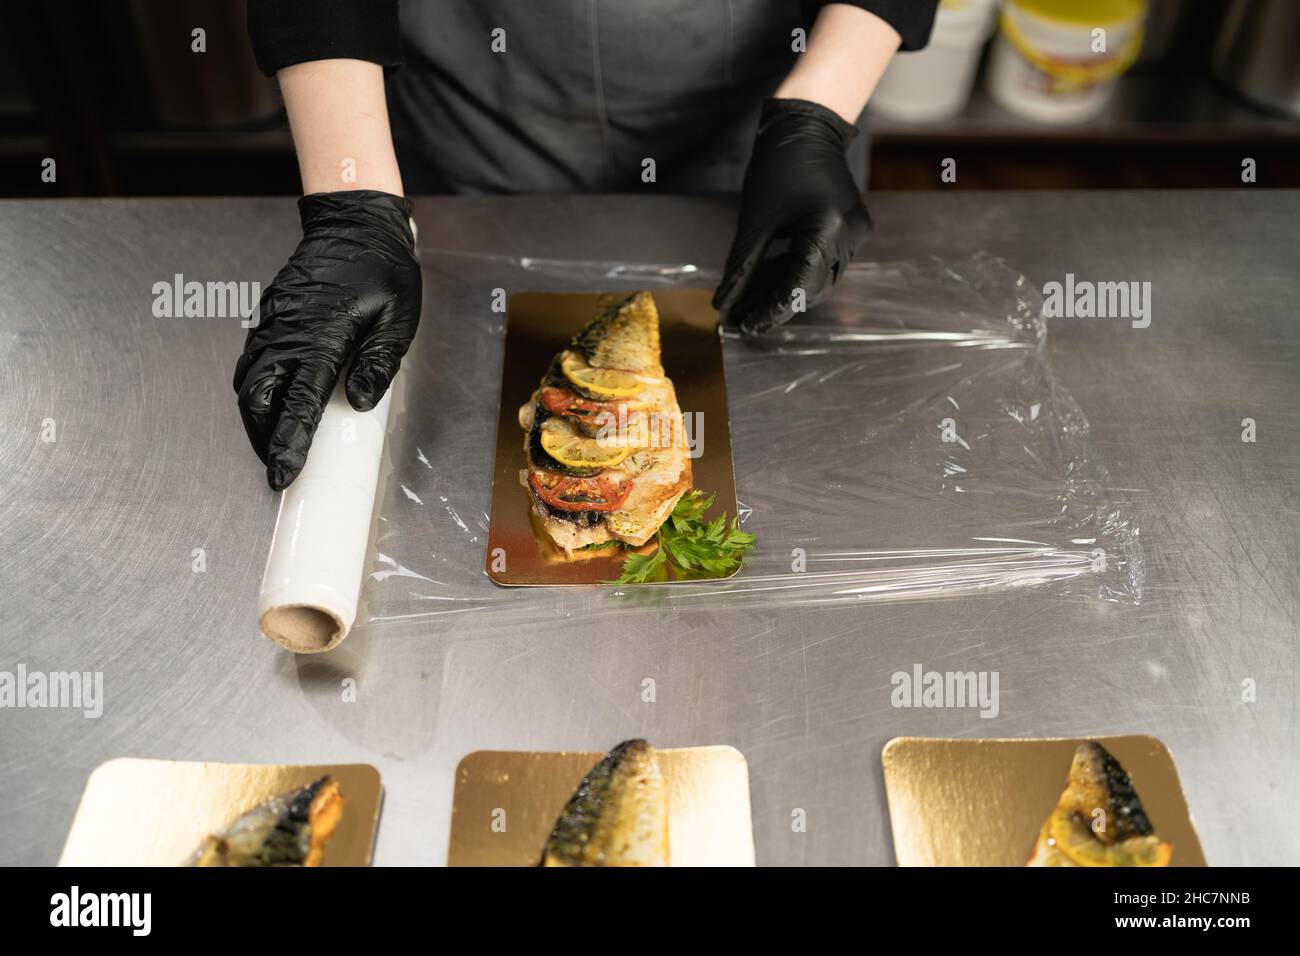 https://c8.alamy.com/comp/2HC7NNB/woman-using-cling-film-to-store-food-on-the-table-in-a-restaurant-in-the-kitchen-a-roll-of-transparent-plastic-cling-film-for-food-packaging-baked-2HC7NNB.jpg